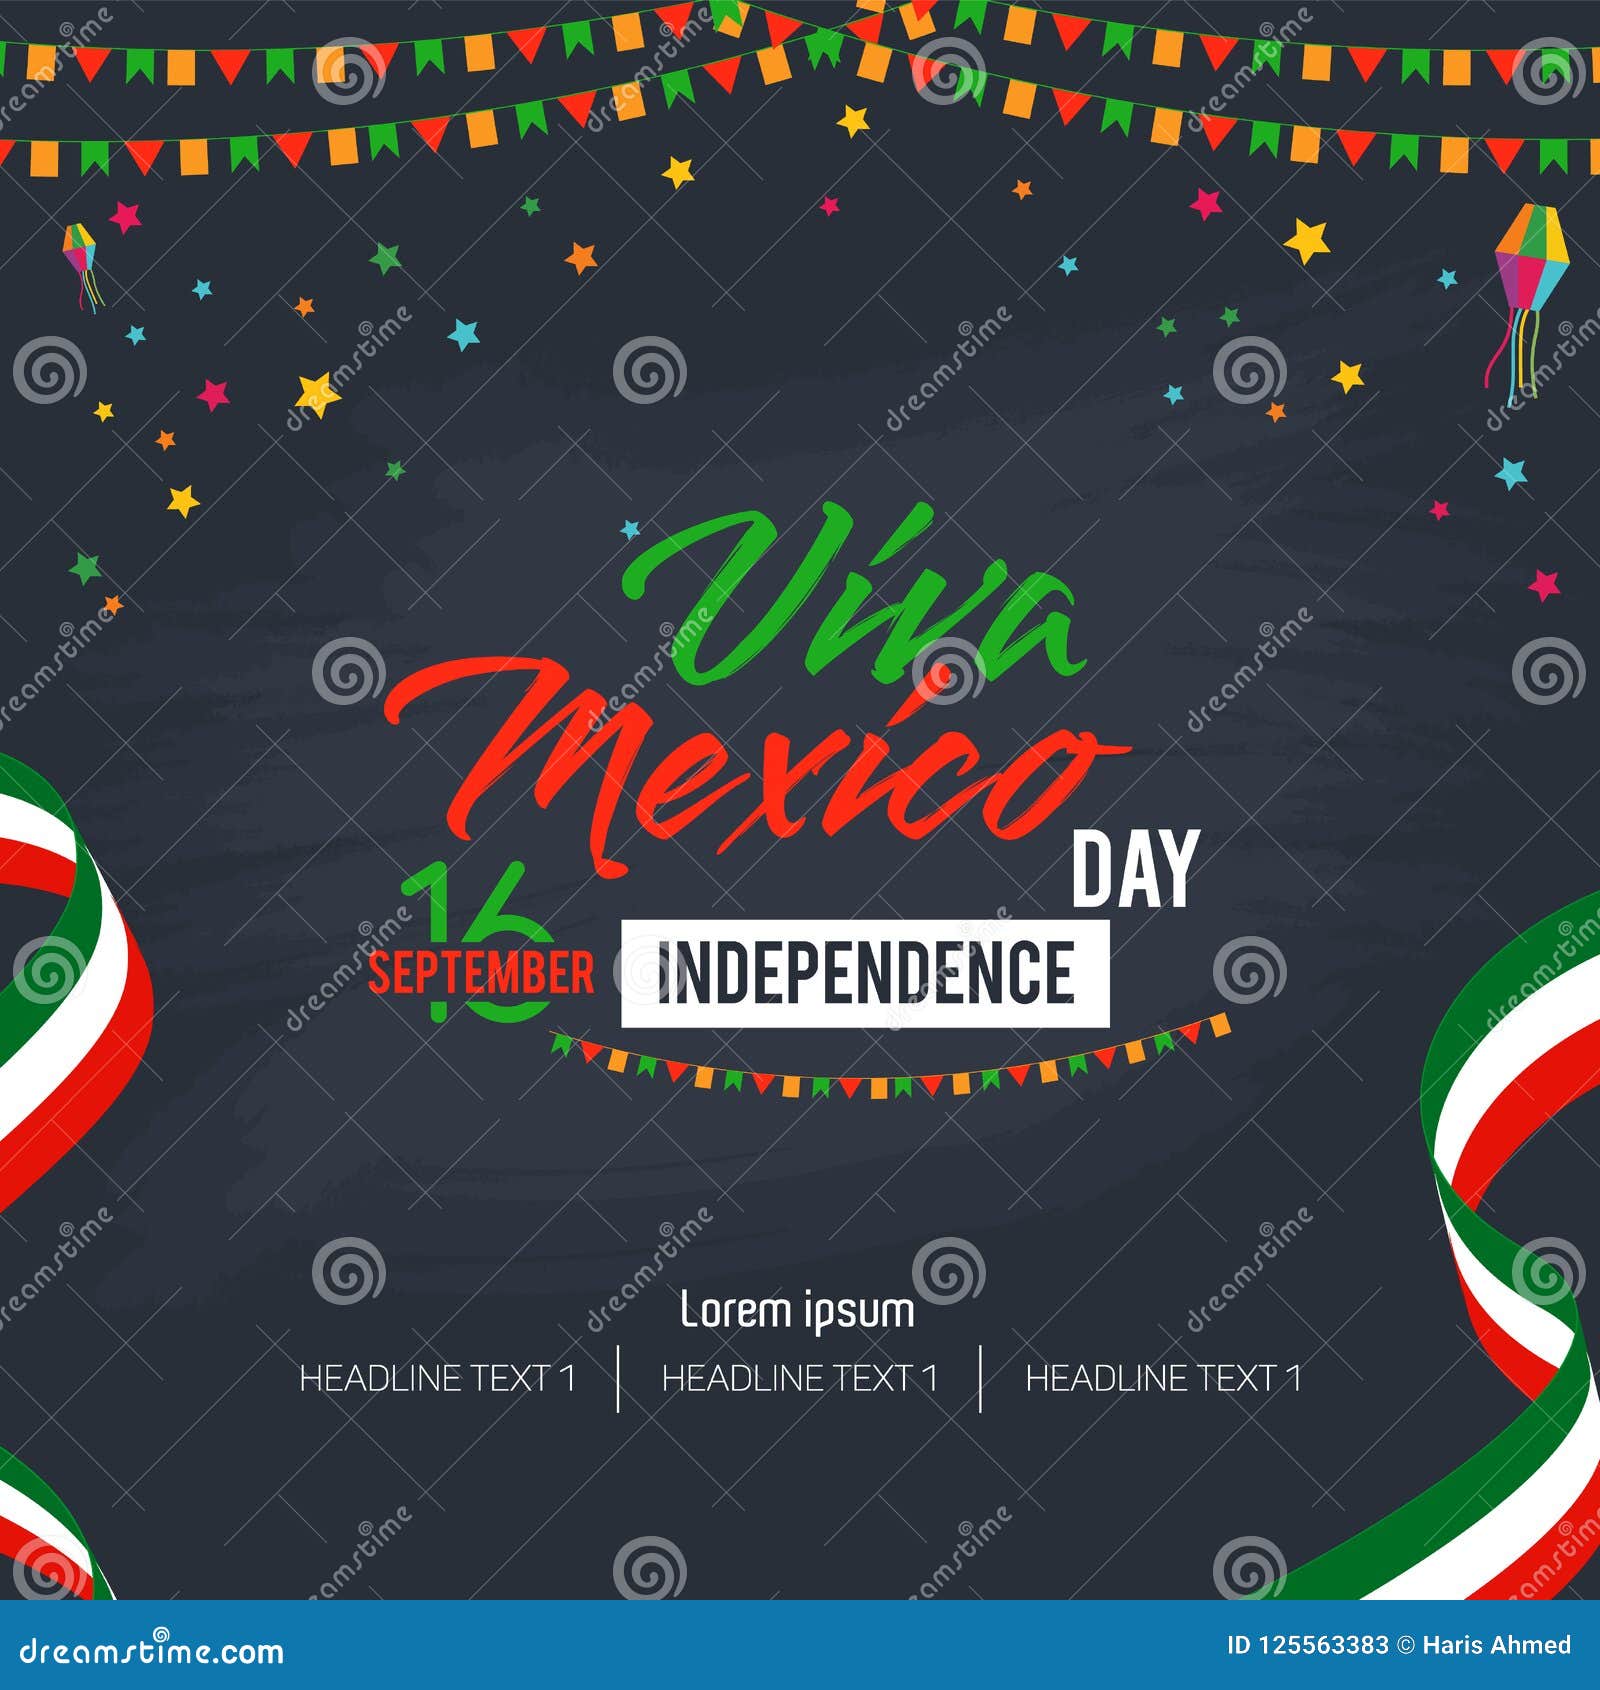 viva mexico happy independence day  background